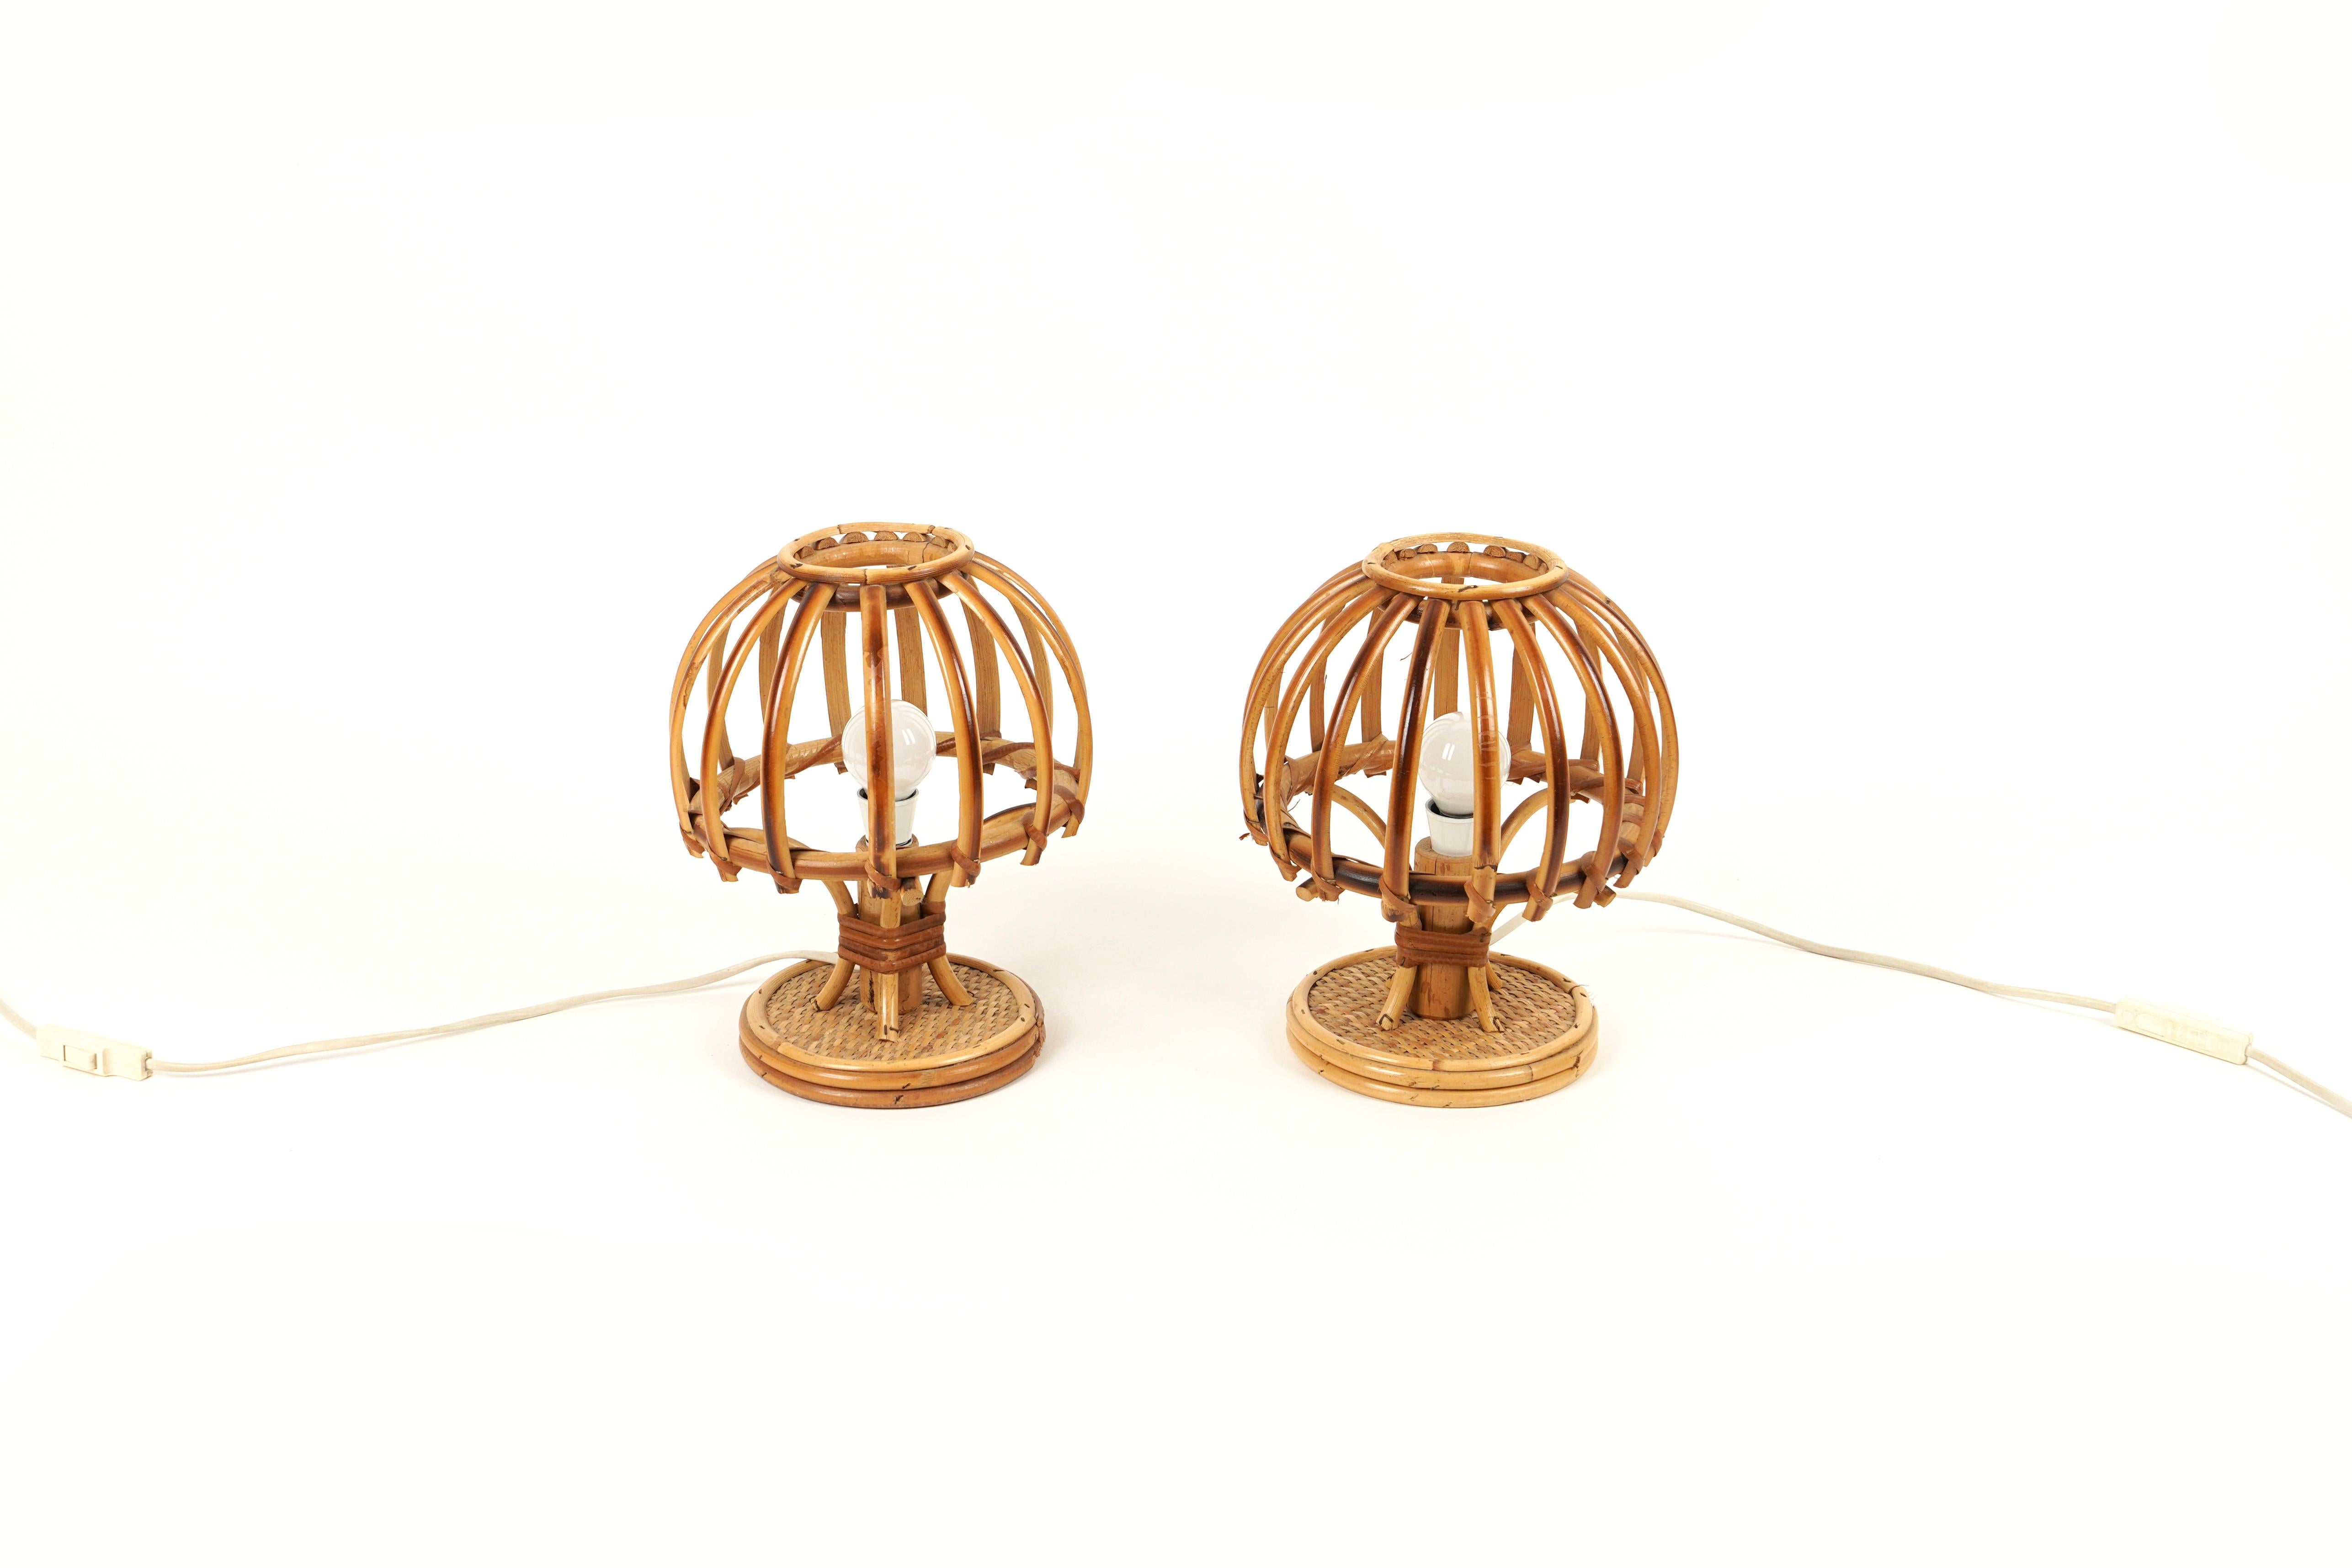 Beautifuls pair of table lamps in bamboo and rattan in the style of Louis Sognot.

Made in Italy in the 1970s.

Louis Sognot was a French designer best known for his elegant furniture made from a combination of rattan and wood. Sognot was